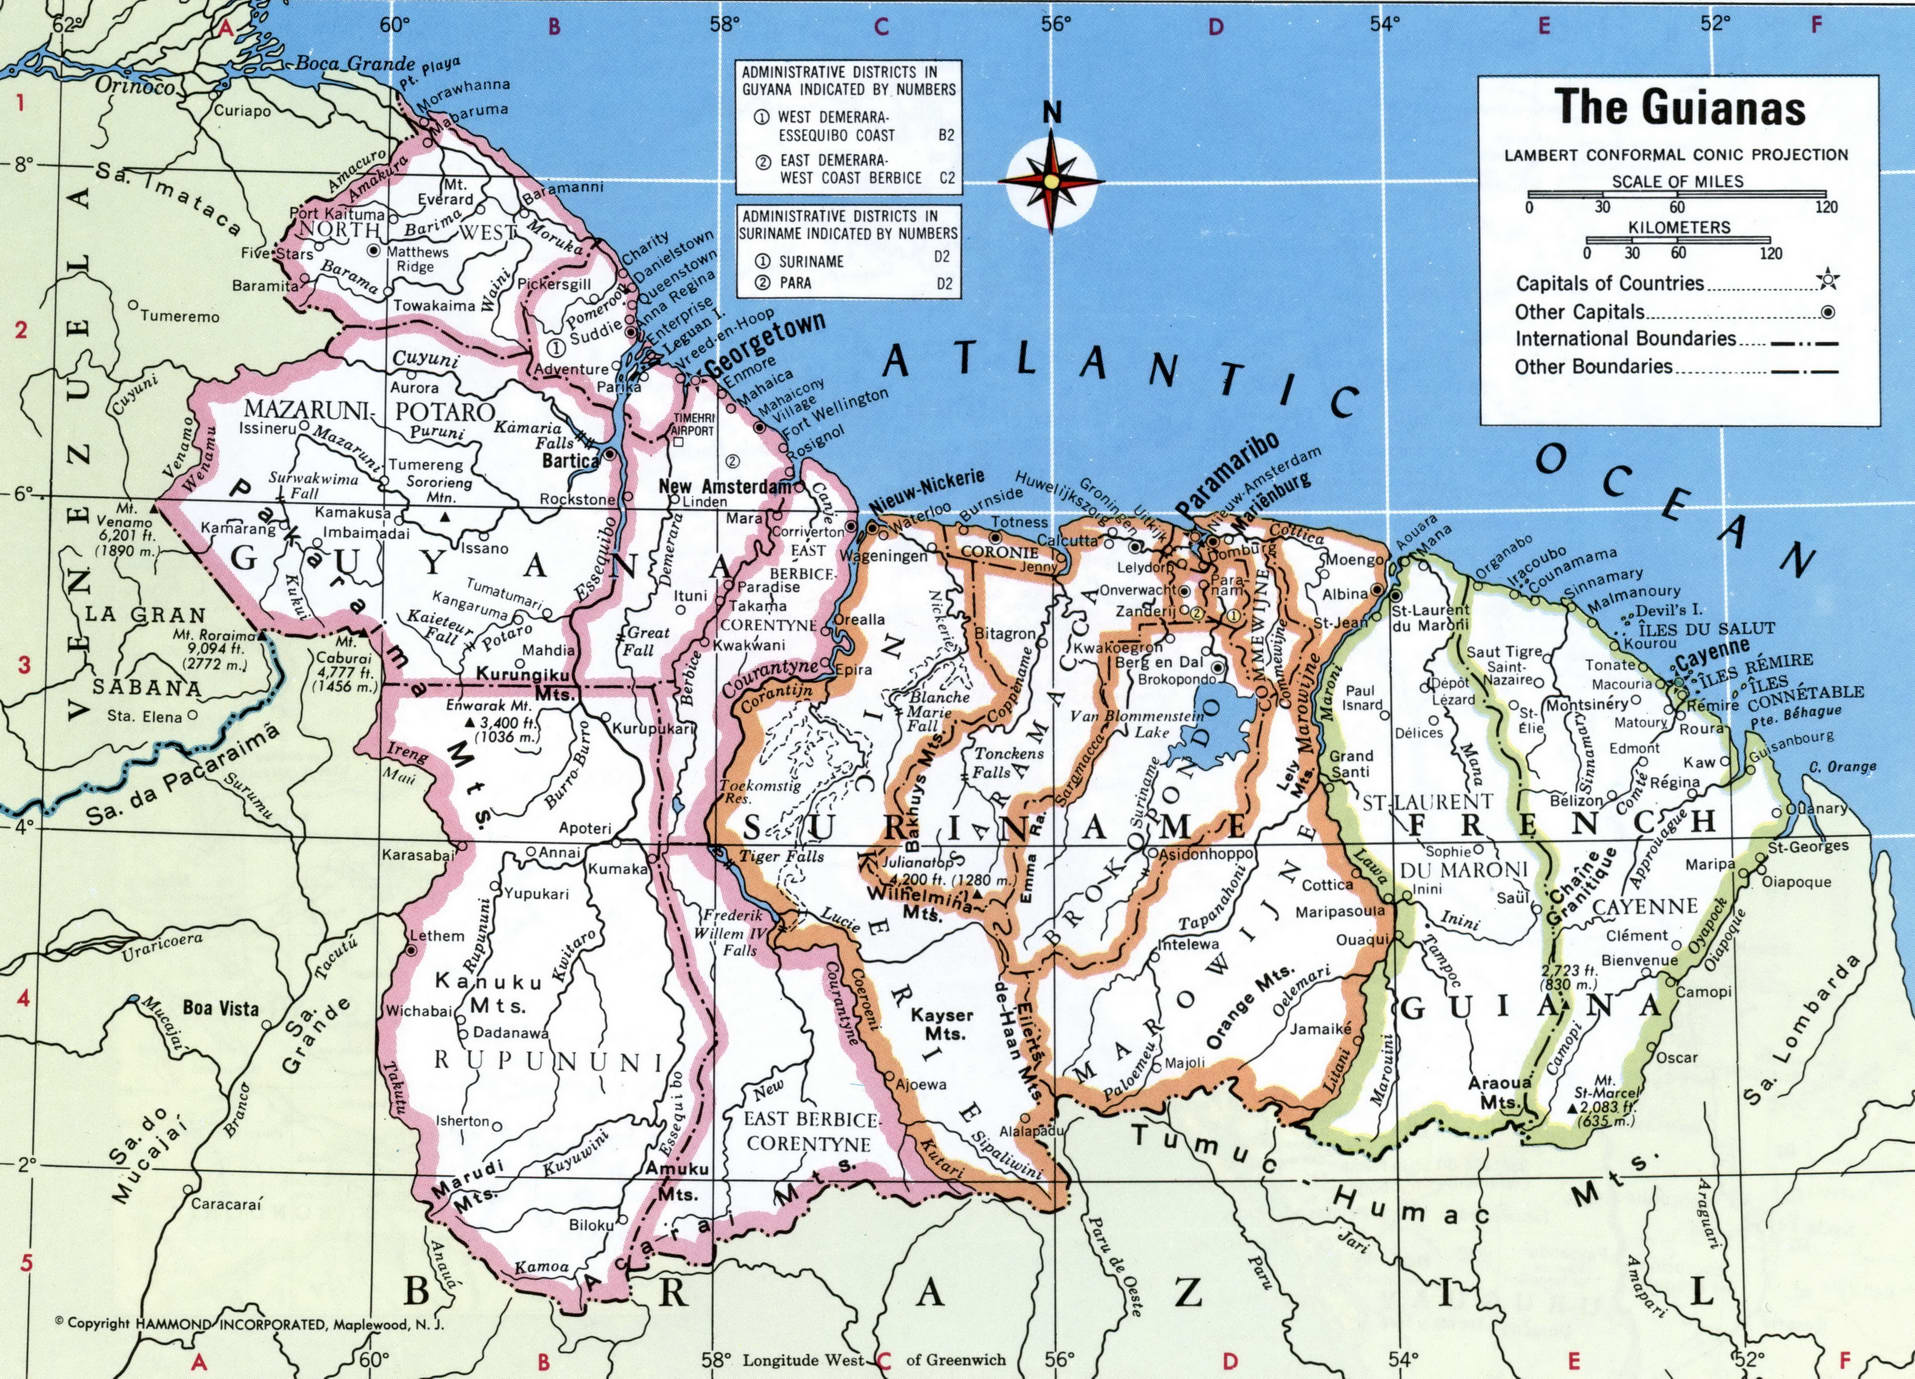 Suriname detailed map